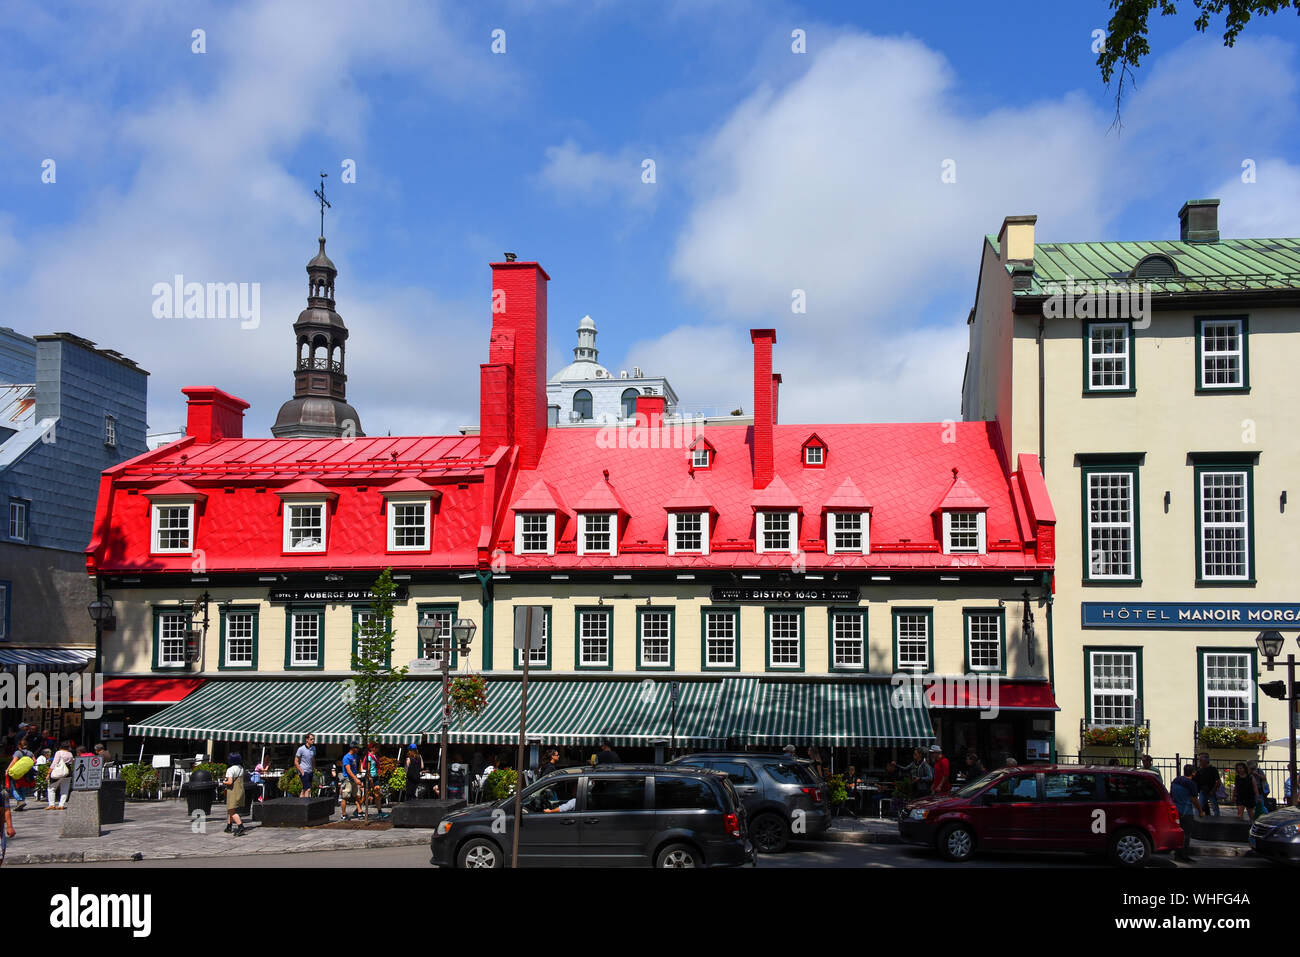 Quebec City, Canada - April, 12, 2019: Historic building that in 1740 became the housing for the French regime stationed in what was New France. It no Stock Photo